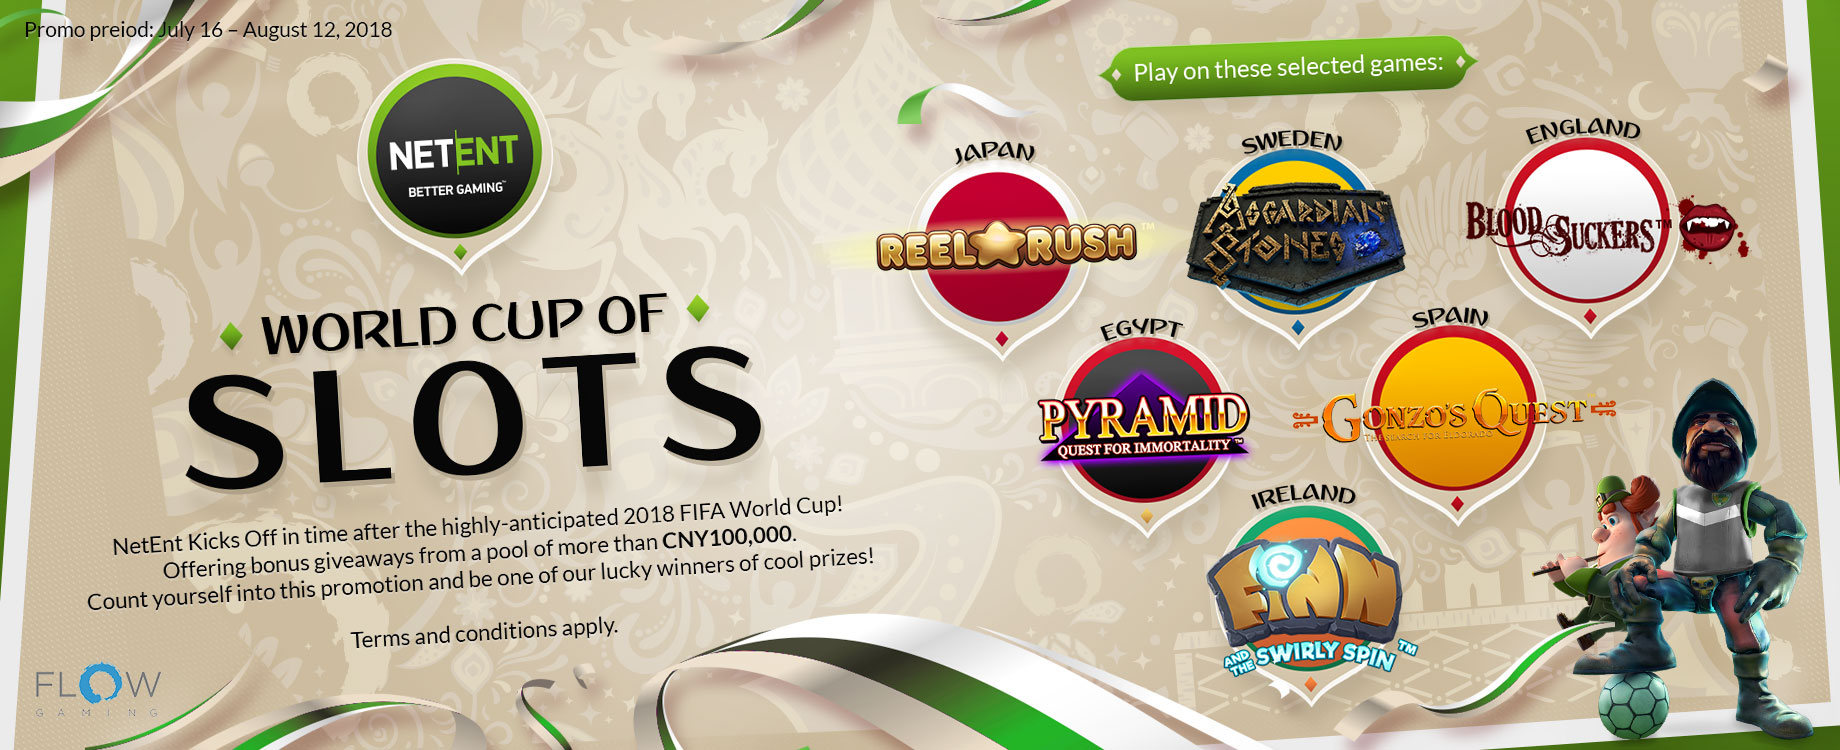 NetEnt World Cup of Slots